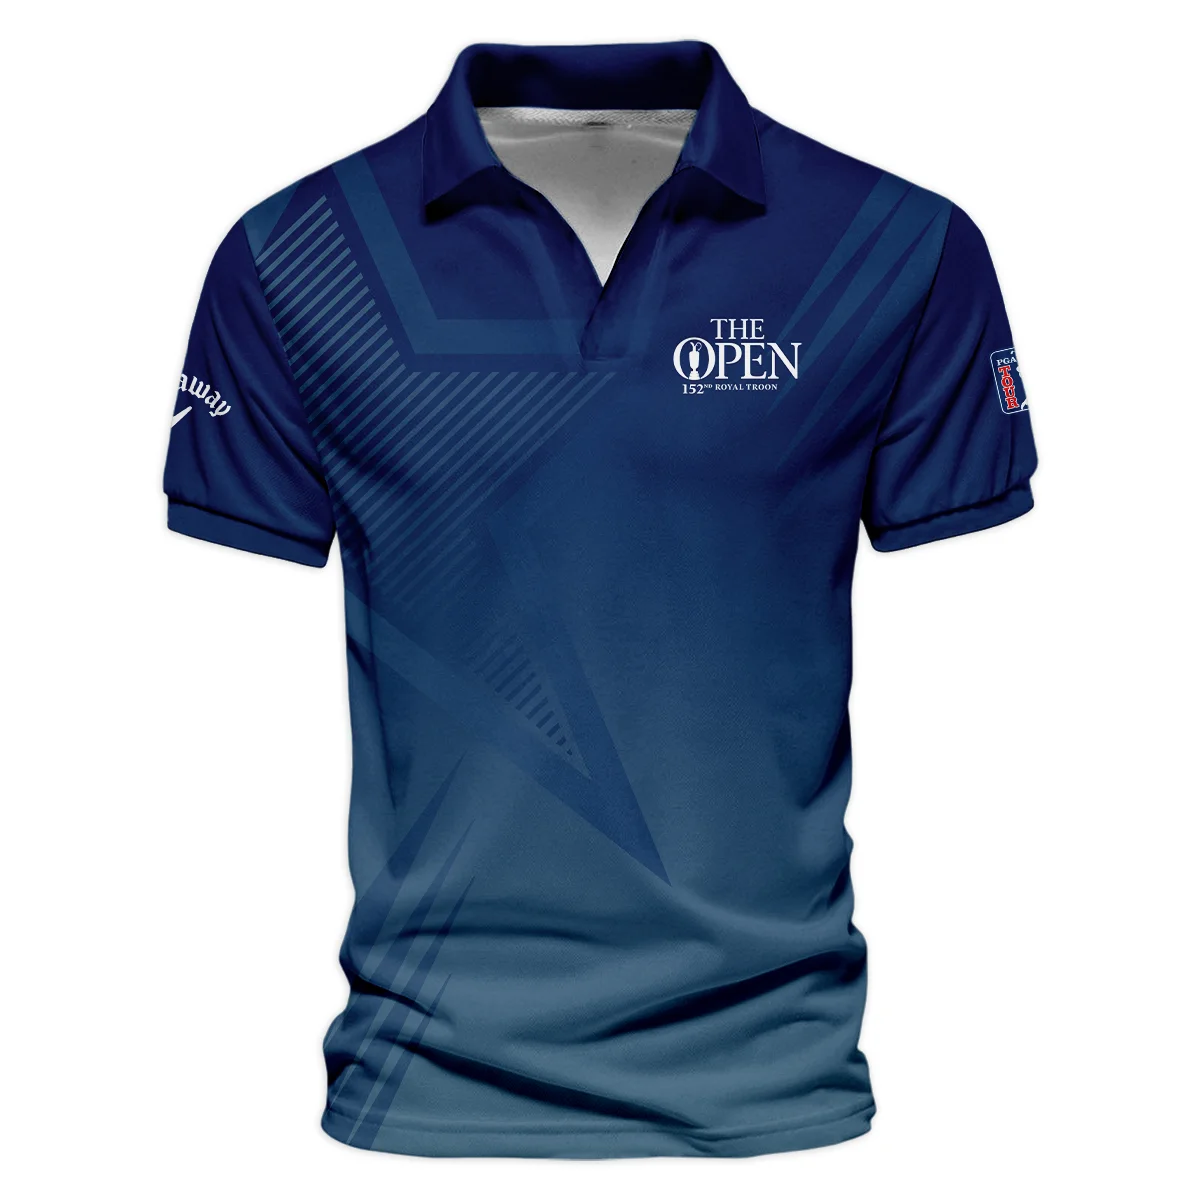 Callaway 152nd Open Championship Abstract Background Dark Blue Gradient Star Line Quarter-Zip Jacket All Over Prints HOTOP260624A04CLWSWZ